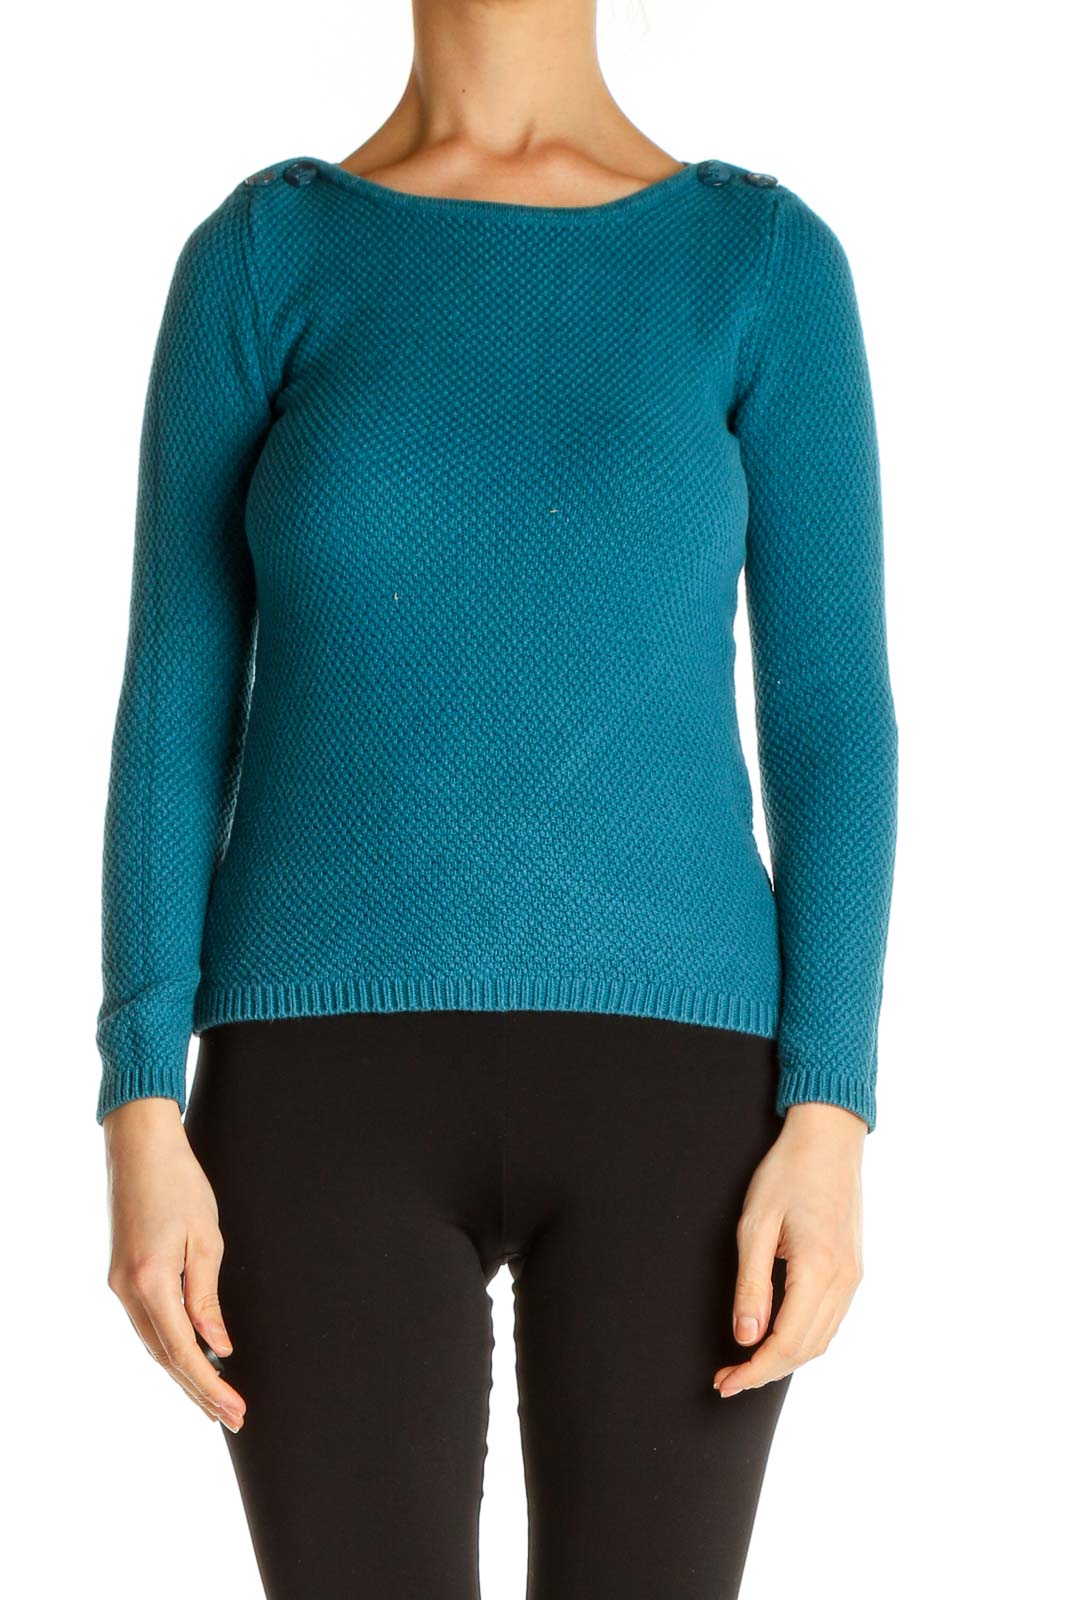 Black Textured All Day Wear Sweater Front